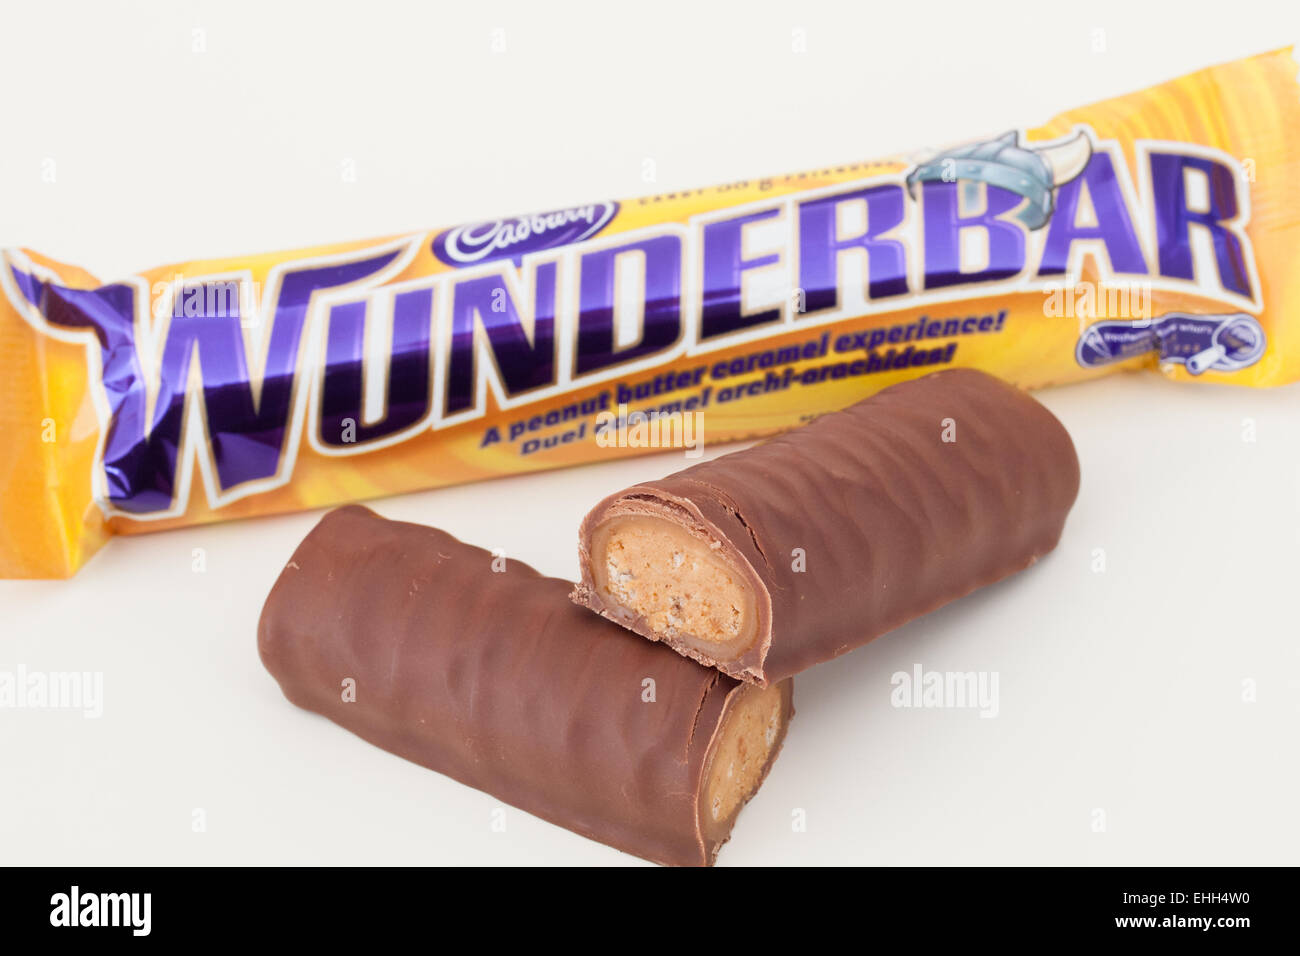 A Cadbury Wunderbar chocolate bar, which is sold in Canada and Germany. Stock Photo